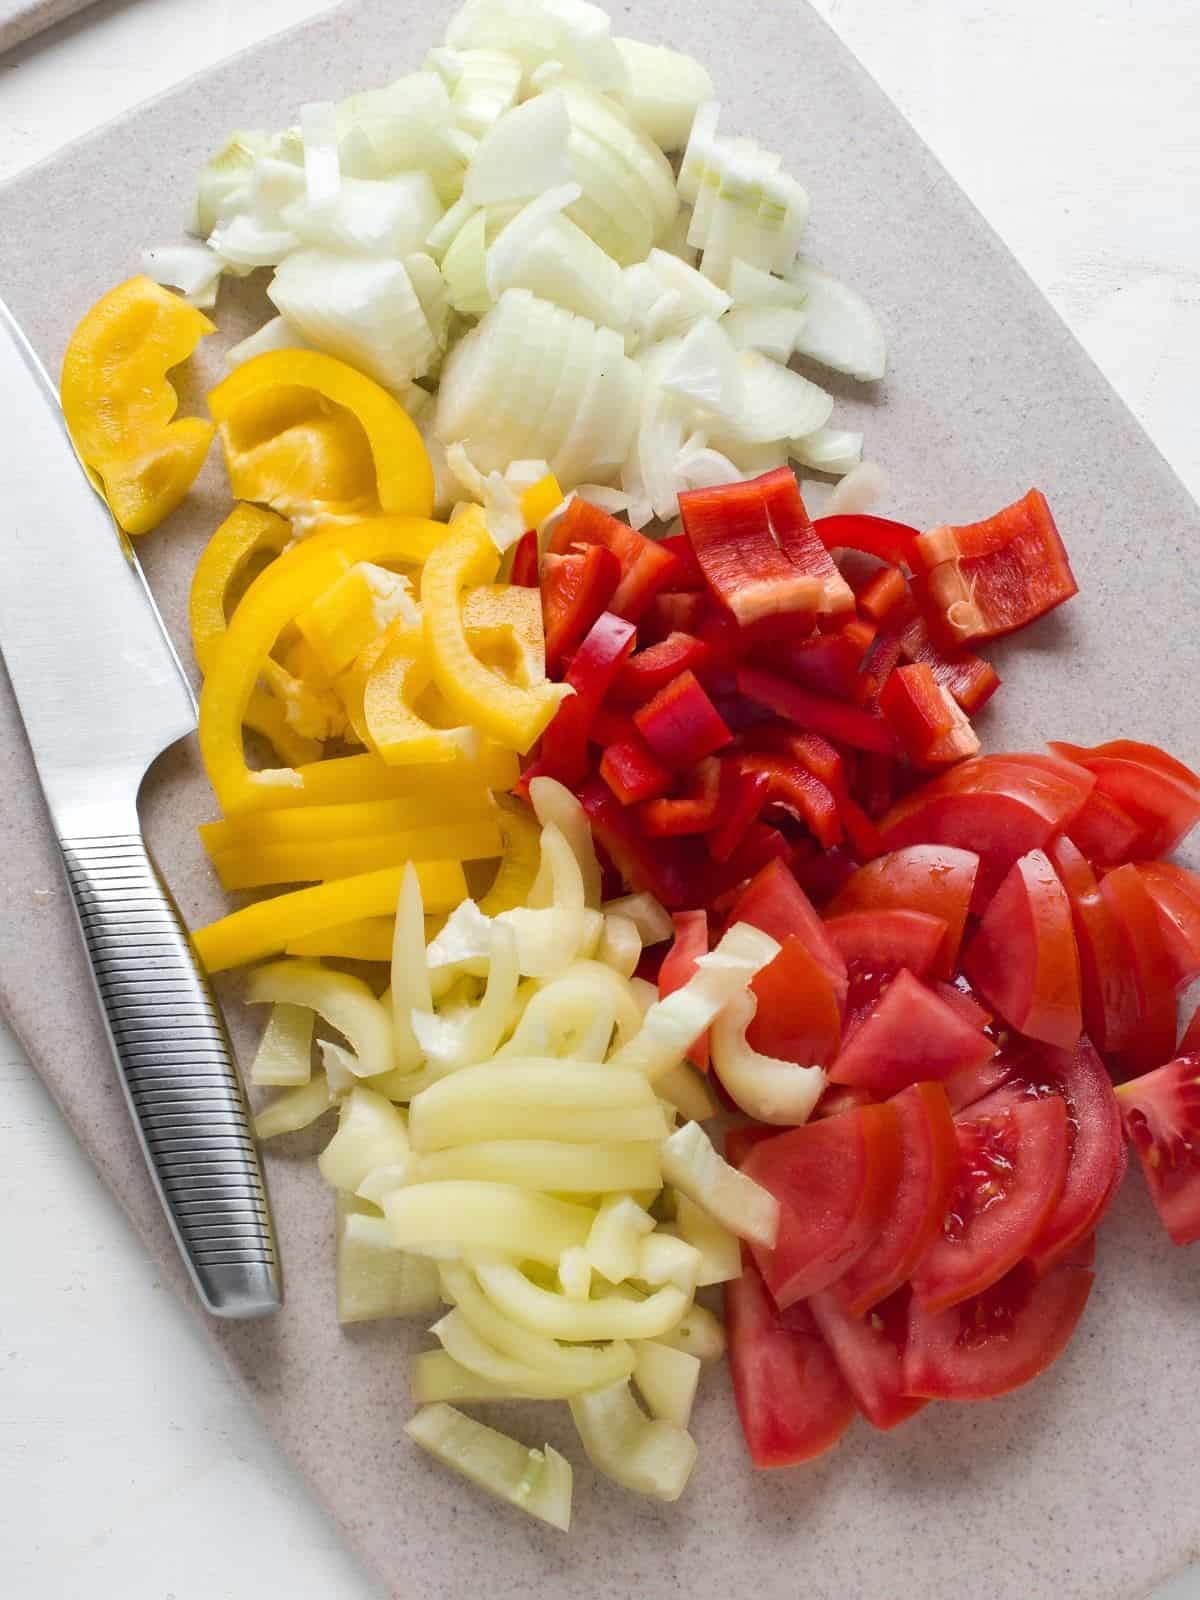 Sliced peppers, tomatoes and onion.